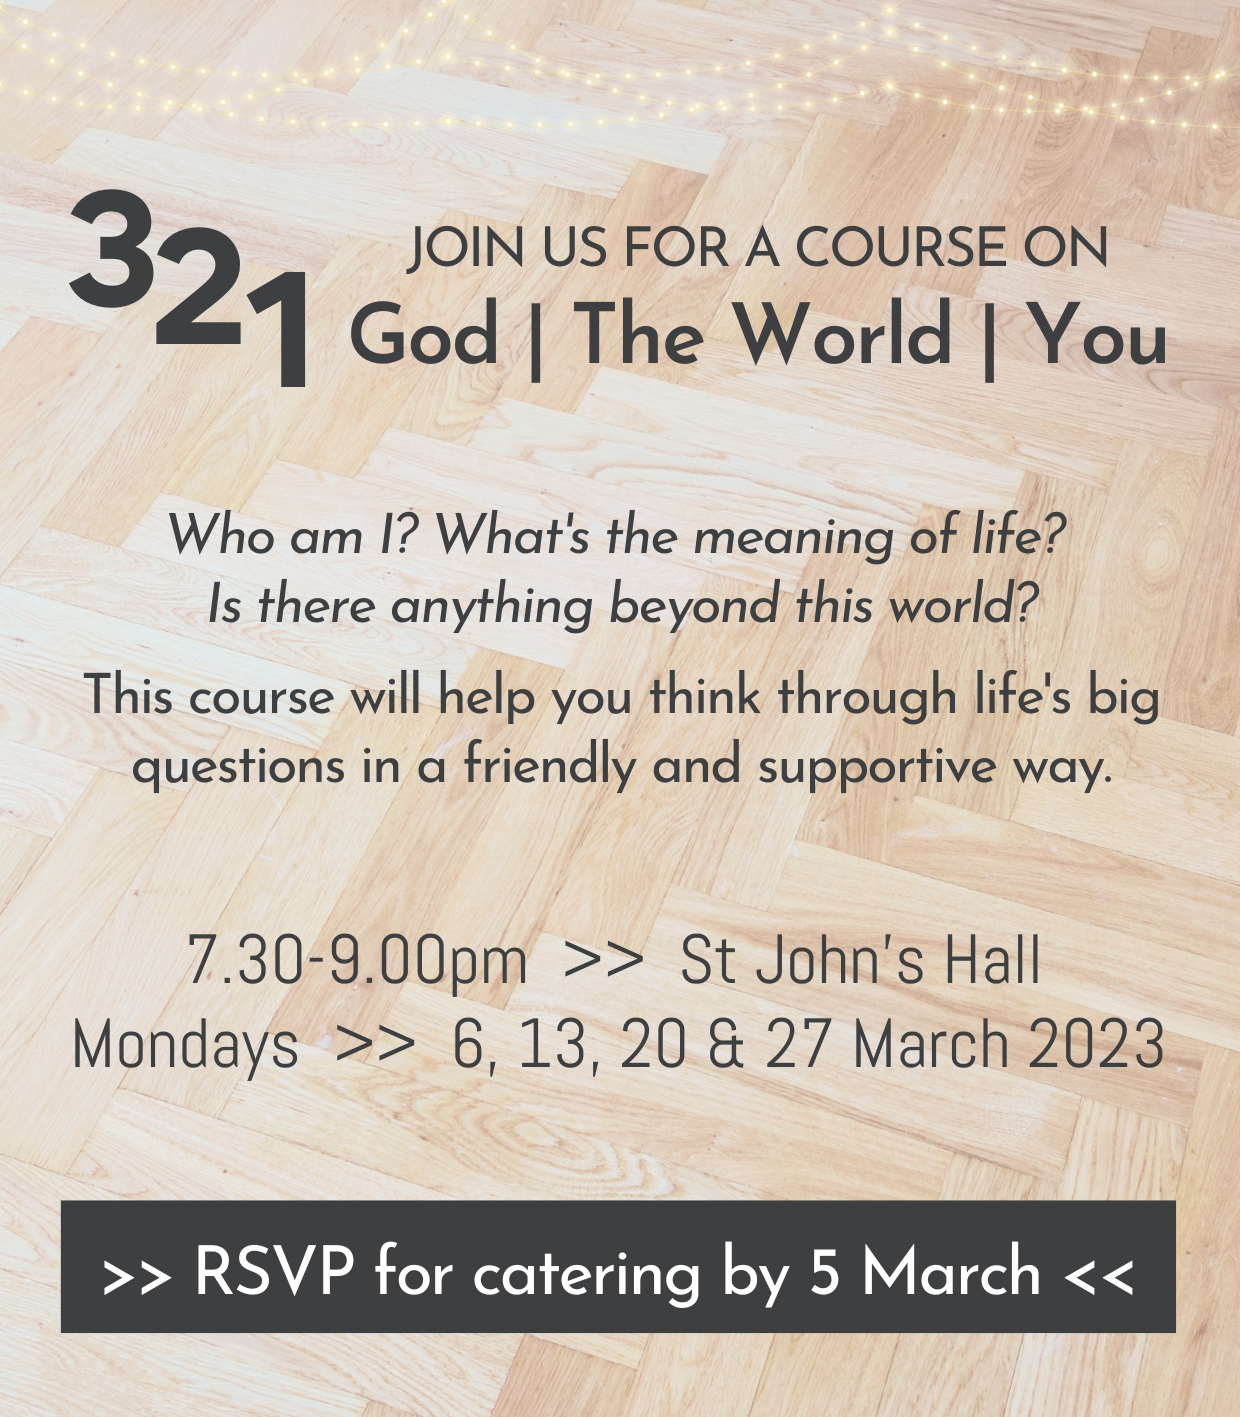 321 Course - Monday nights in March starting at 7.30pm